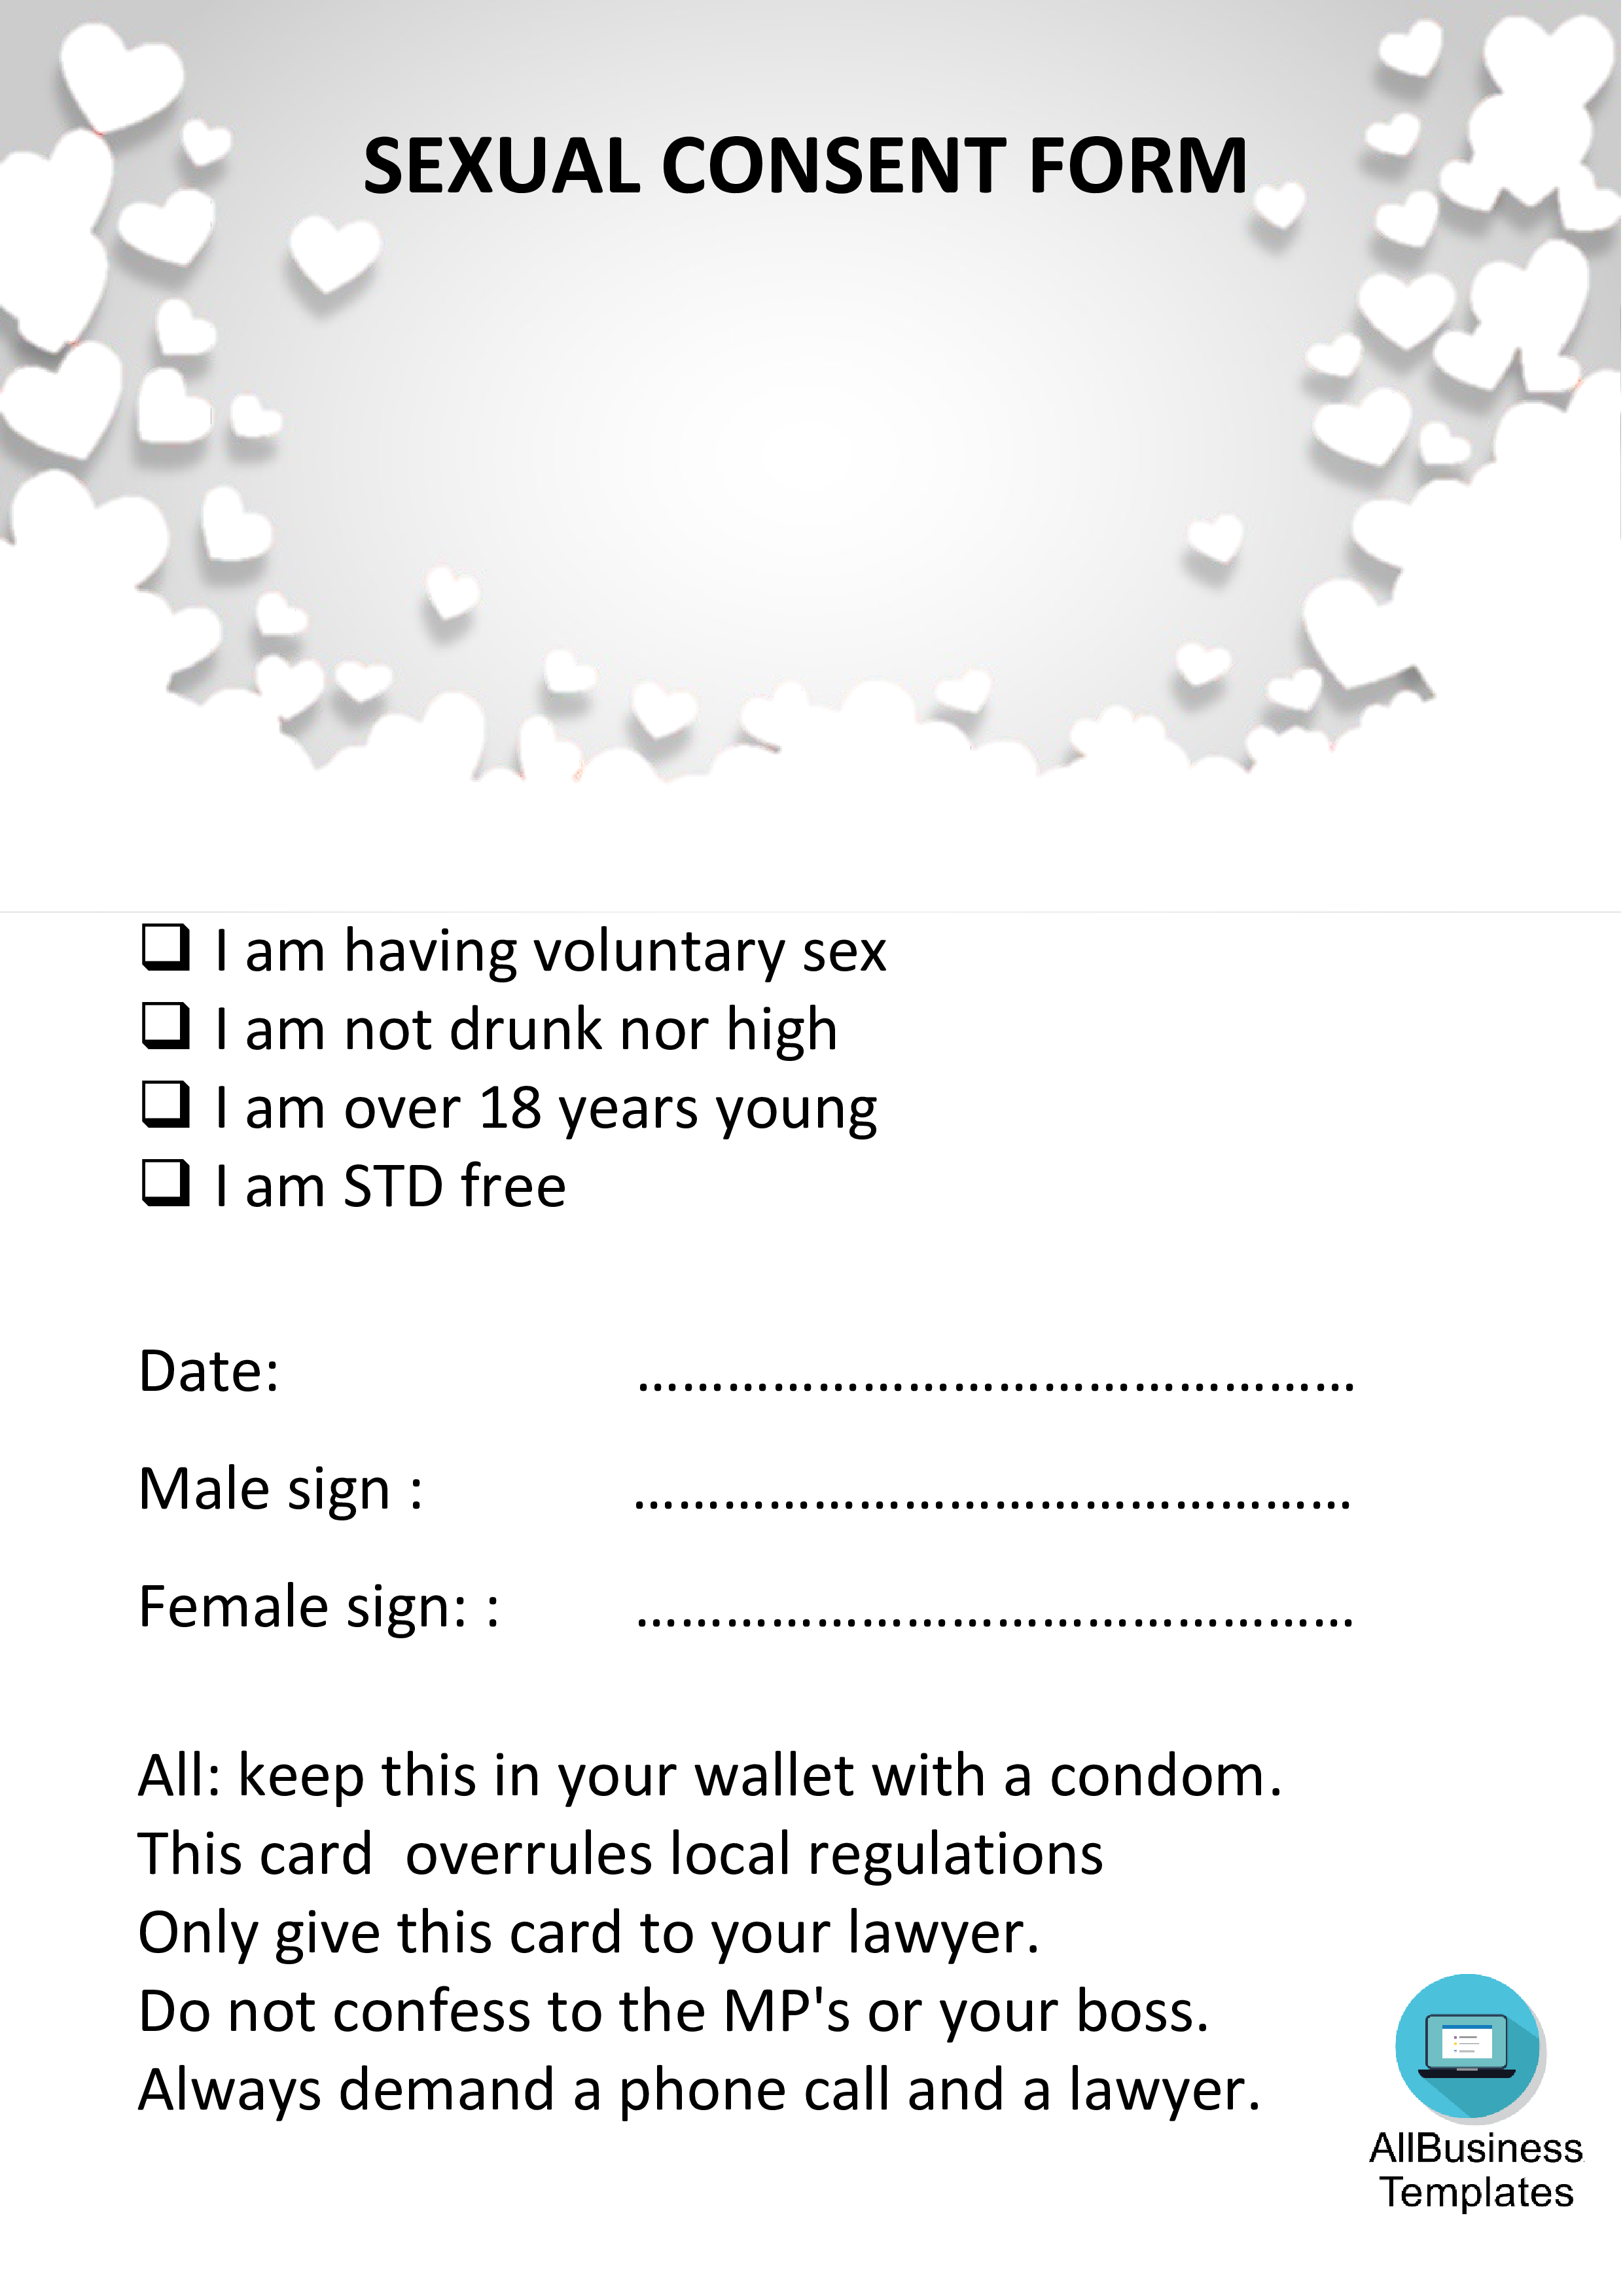 Sexual consent form 模板